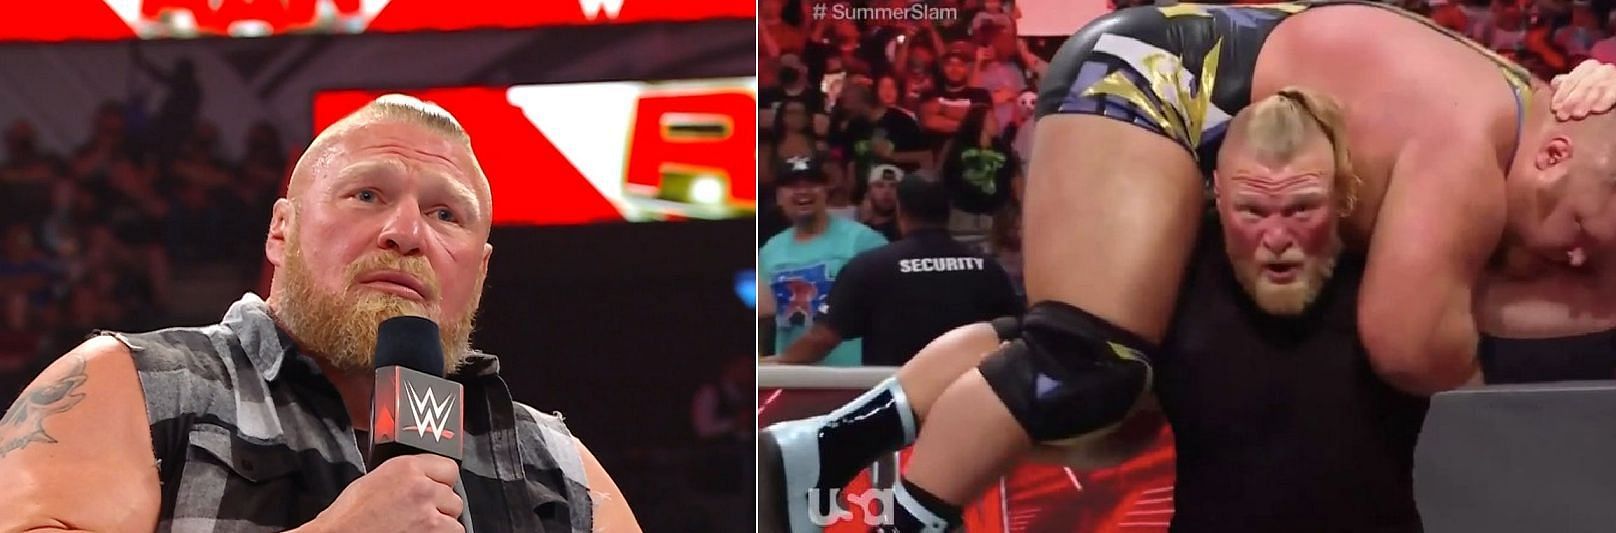 [Watch] Brock Lesnar botches his own finisher on return to WWE RAW